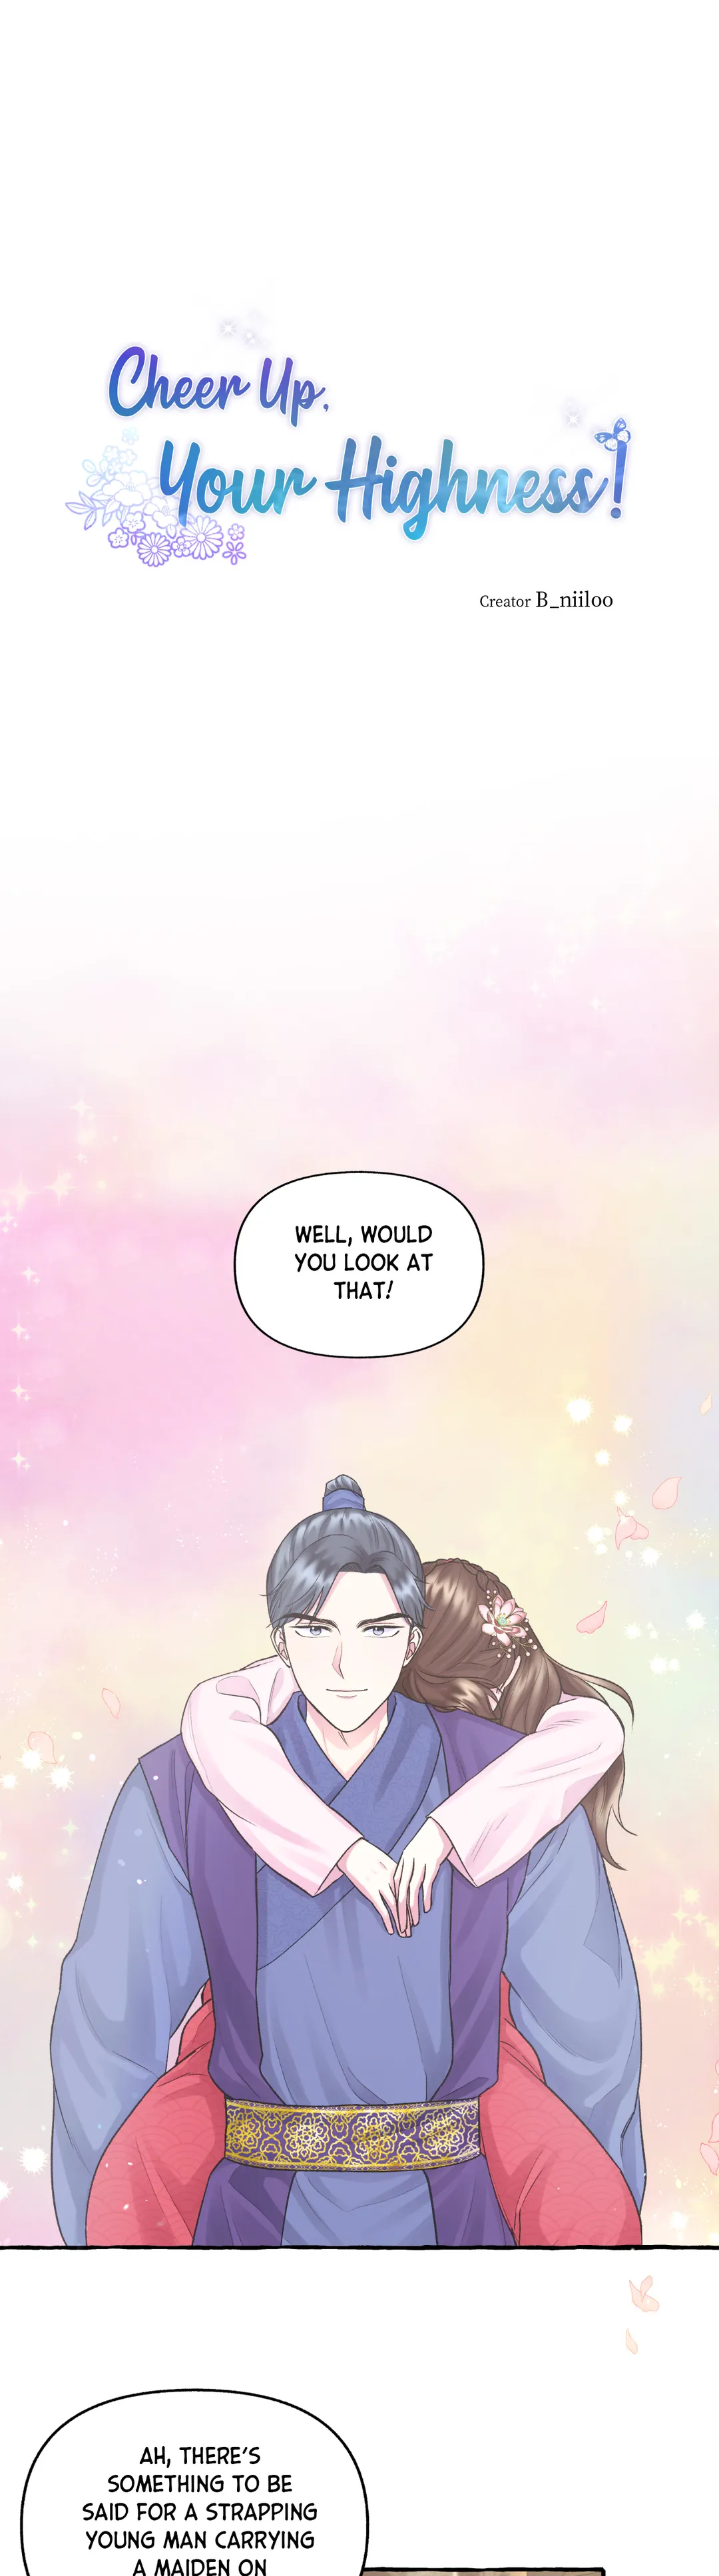 Cheer Up, Your Highness! chapter 5